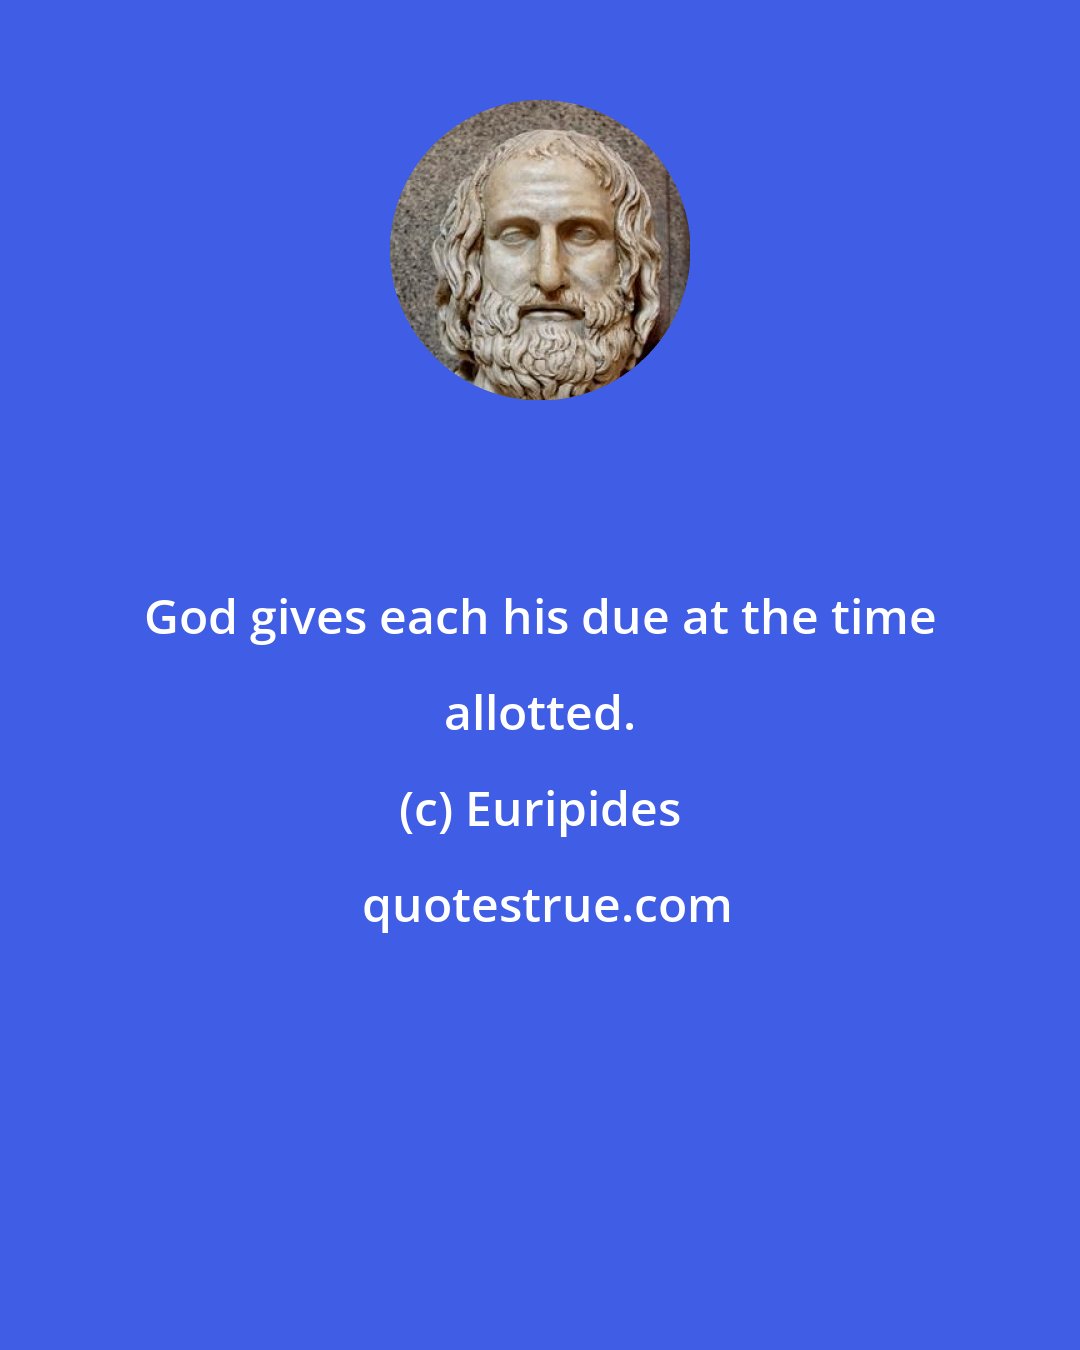 Euripides: God gives each his due at the time allotted.